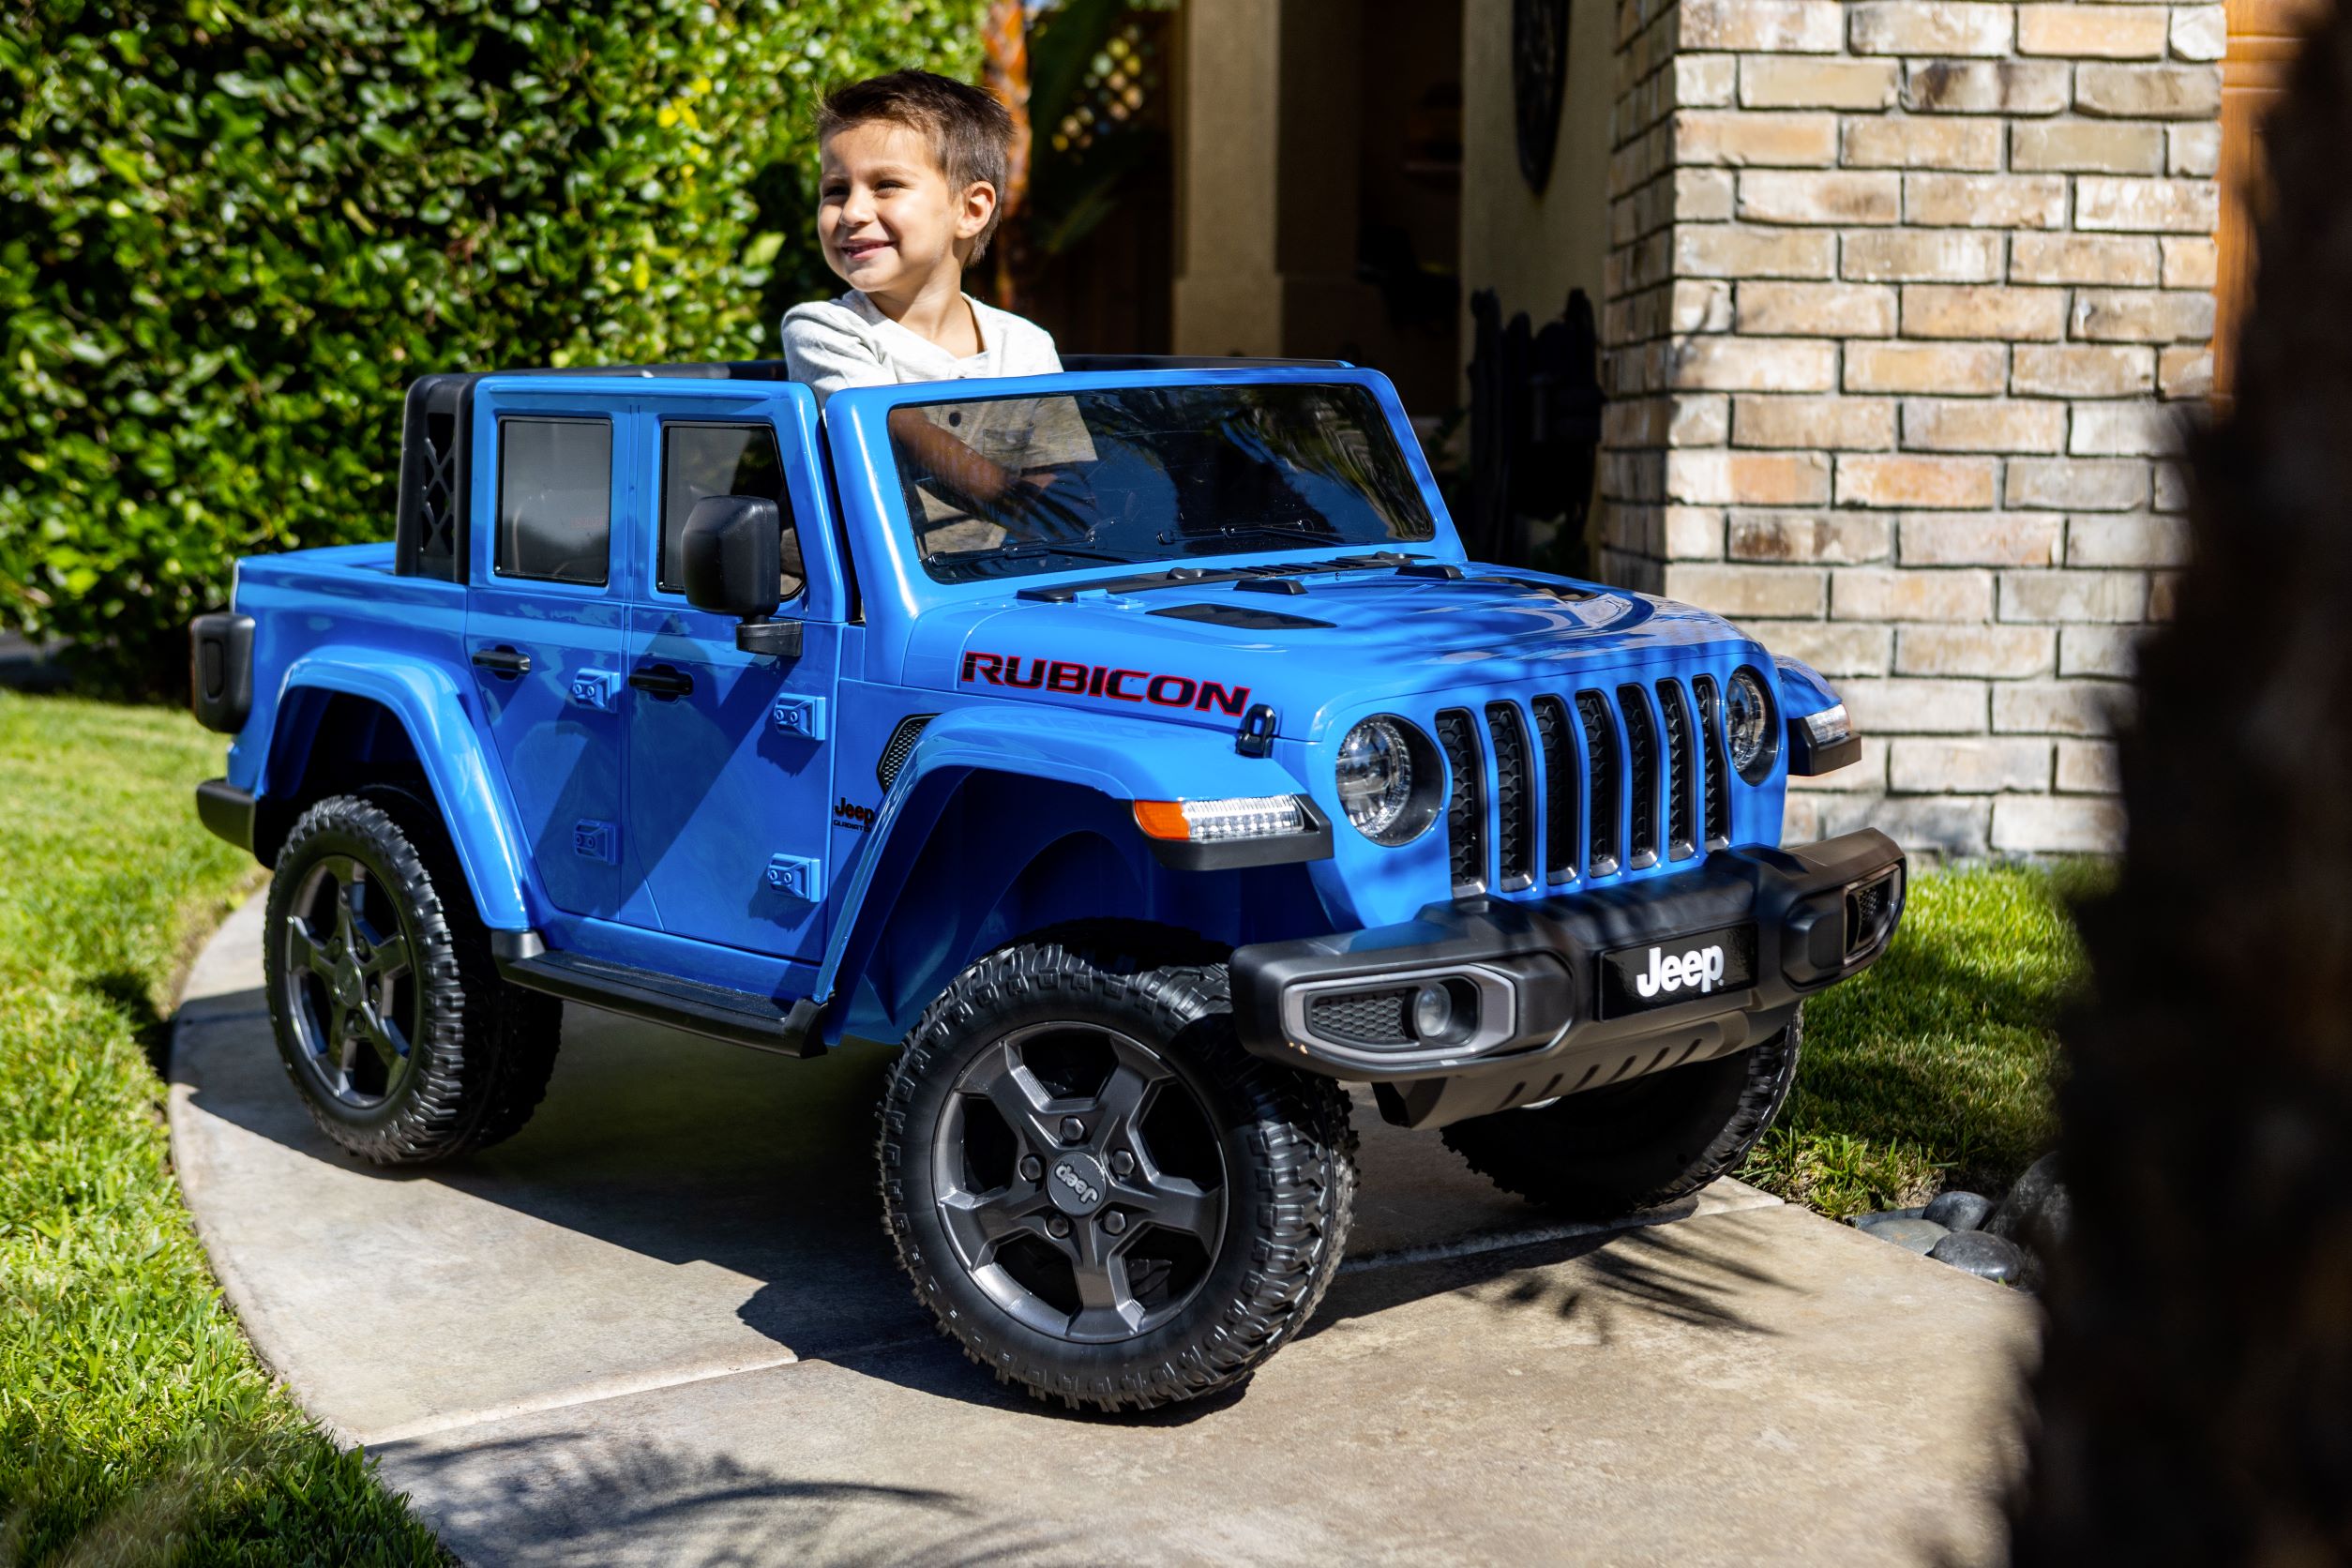 12V Jeep Gladiator Rubicon Battery Powered Ride-on by Hyper Toys, 2-Seater, Blue, for a Child Ages 3-8, Max Speed 5 mph - image 4 of 18